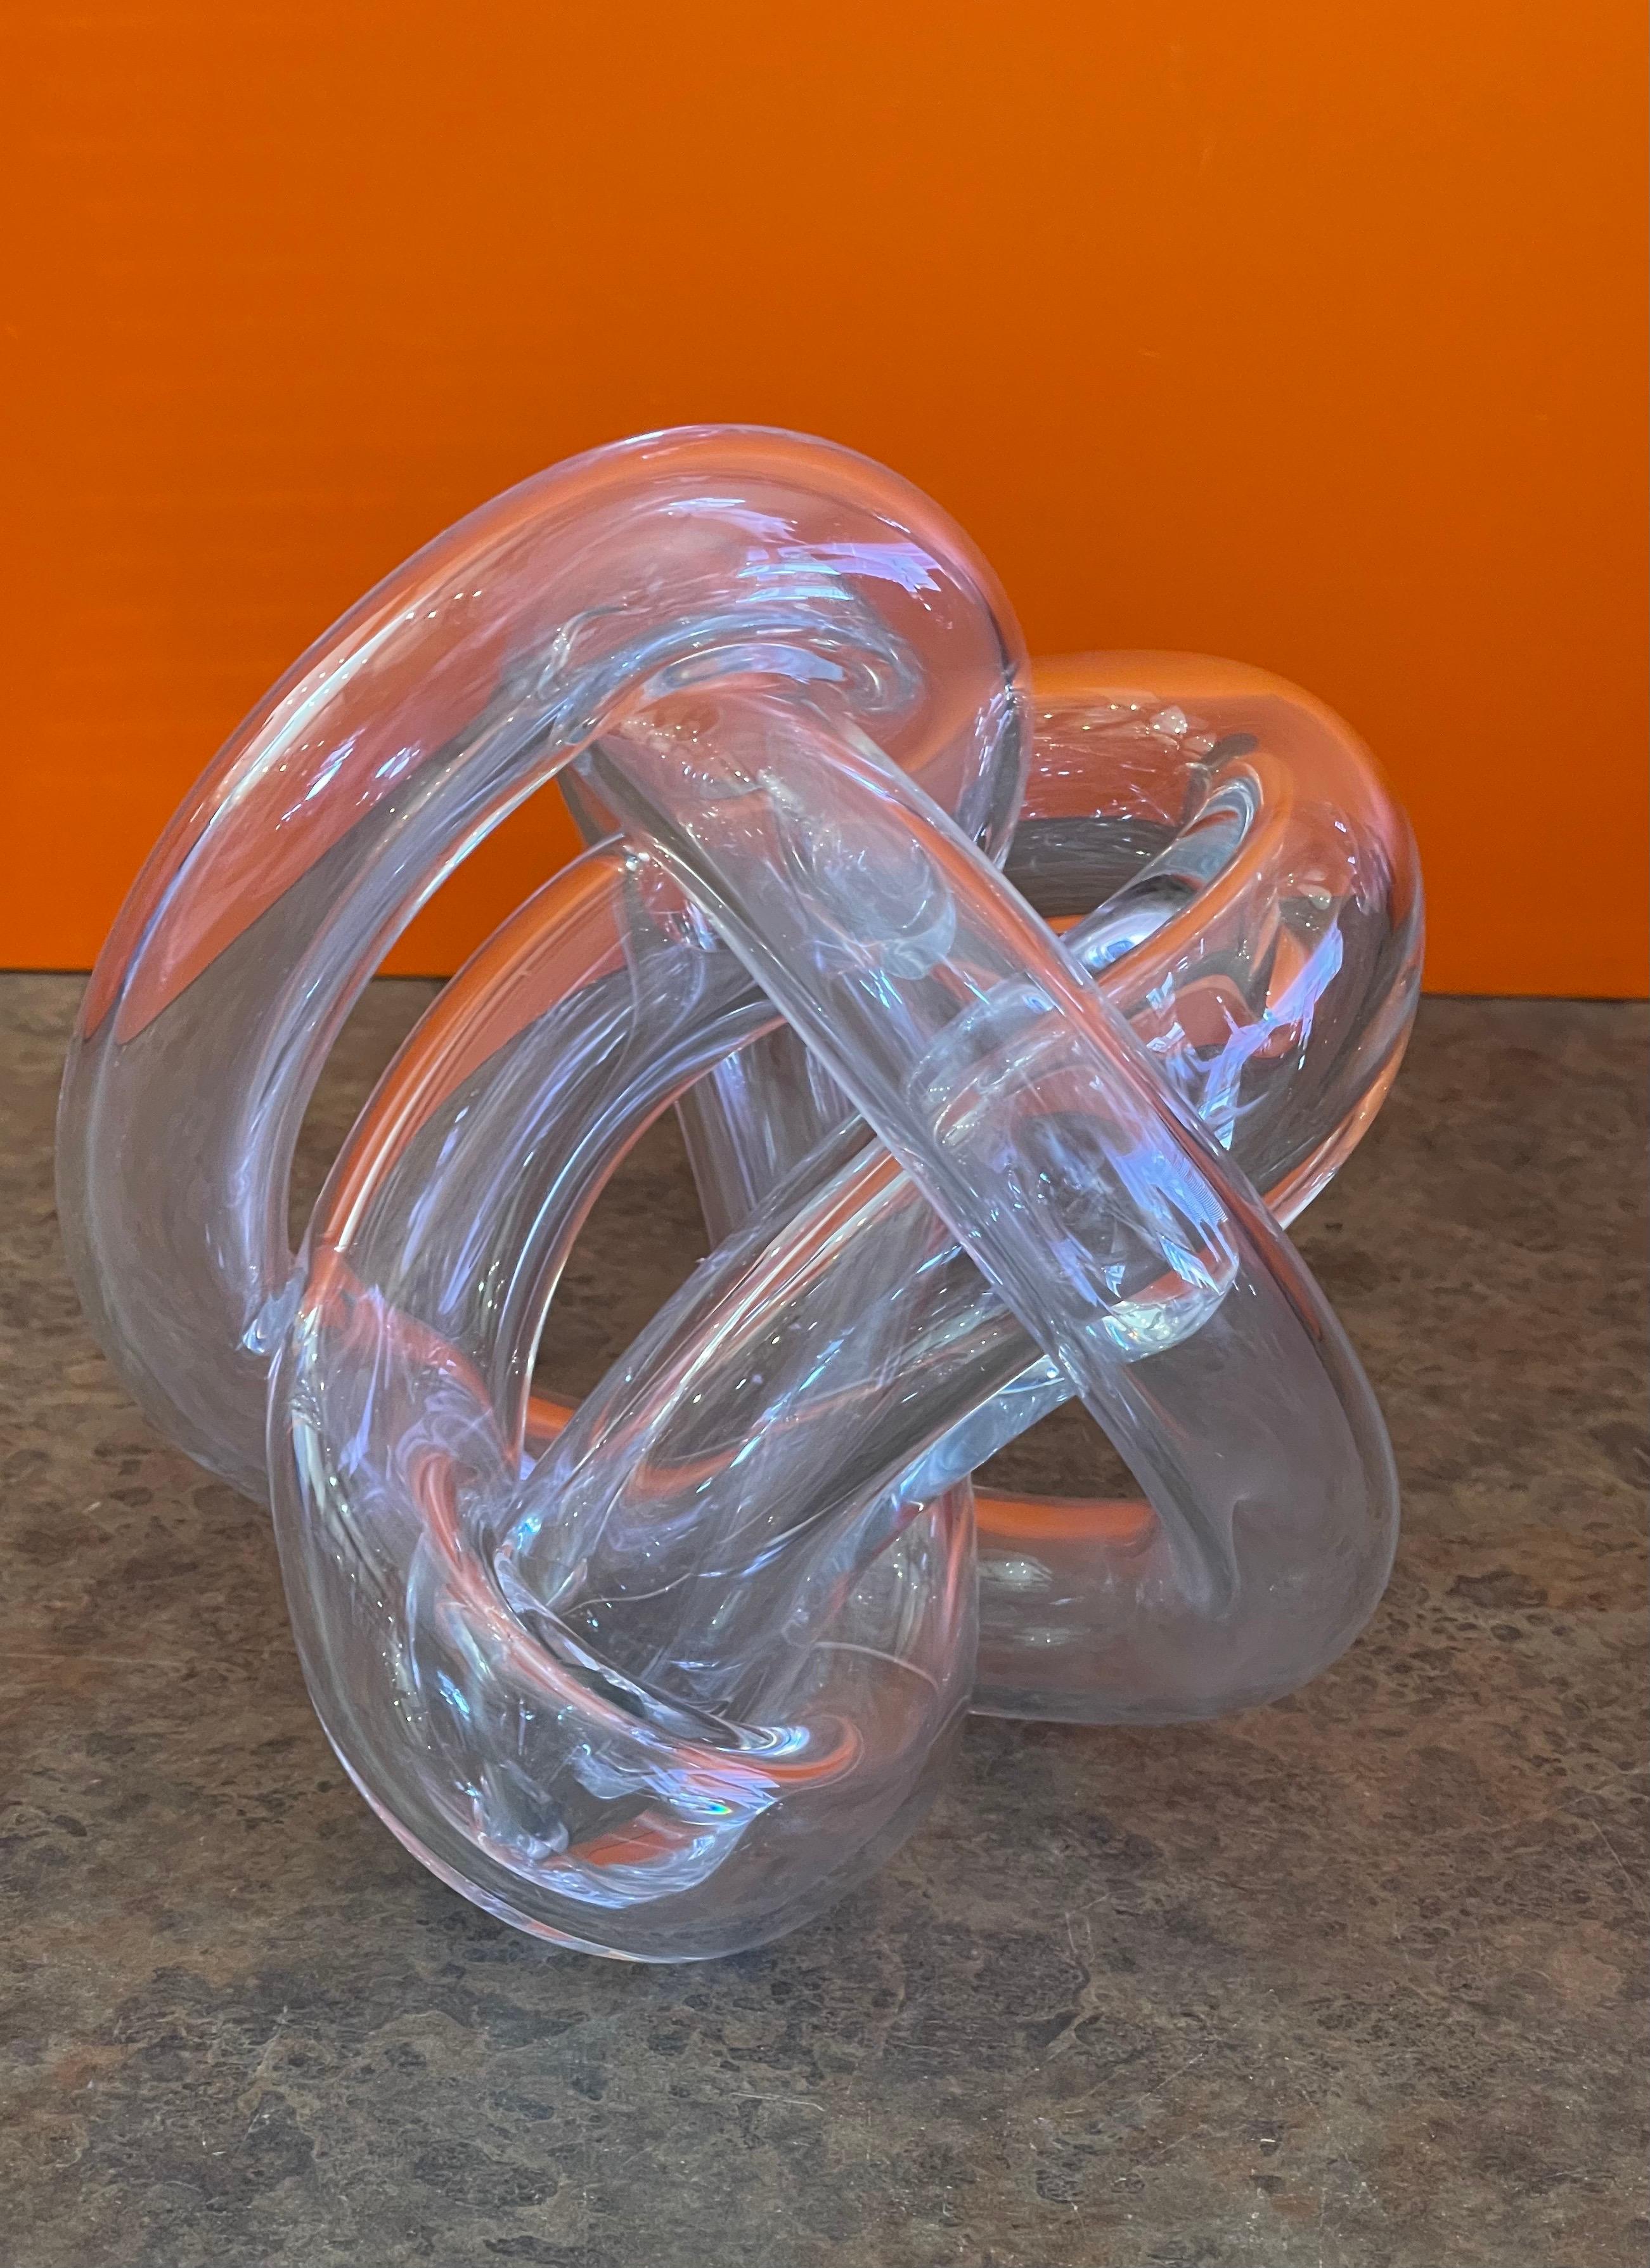 Large clear art glass orb / knot sculpture, circa 1980s. This Italian hand blown glass orb has a biomorphic free form design and is in very good condition with no chips or cracks. The piece is approximately 7.5